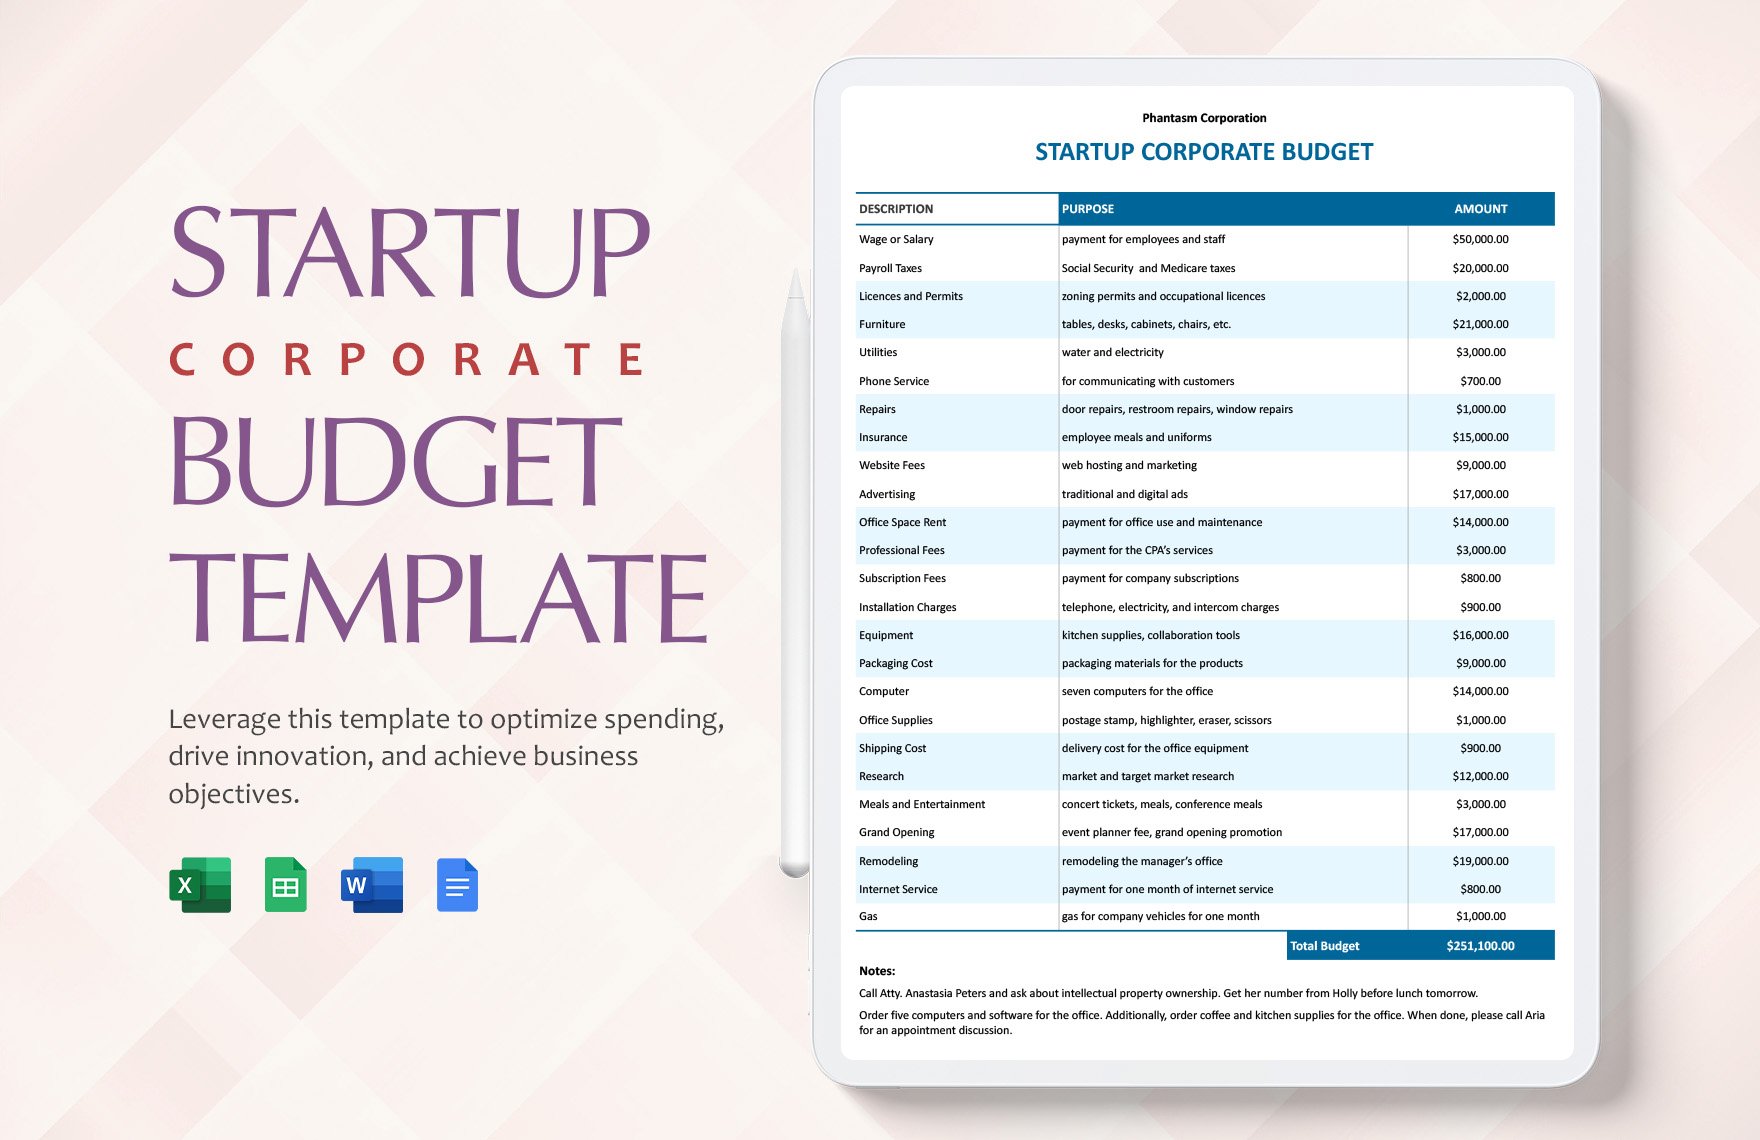 Startup Corporate Budget Template in Word, Google Docs, Excel, Google Sheets